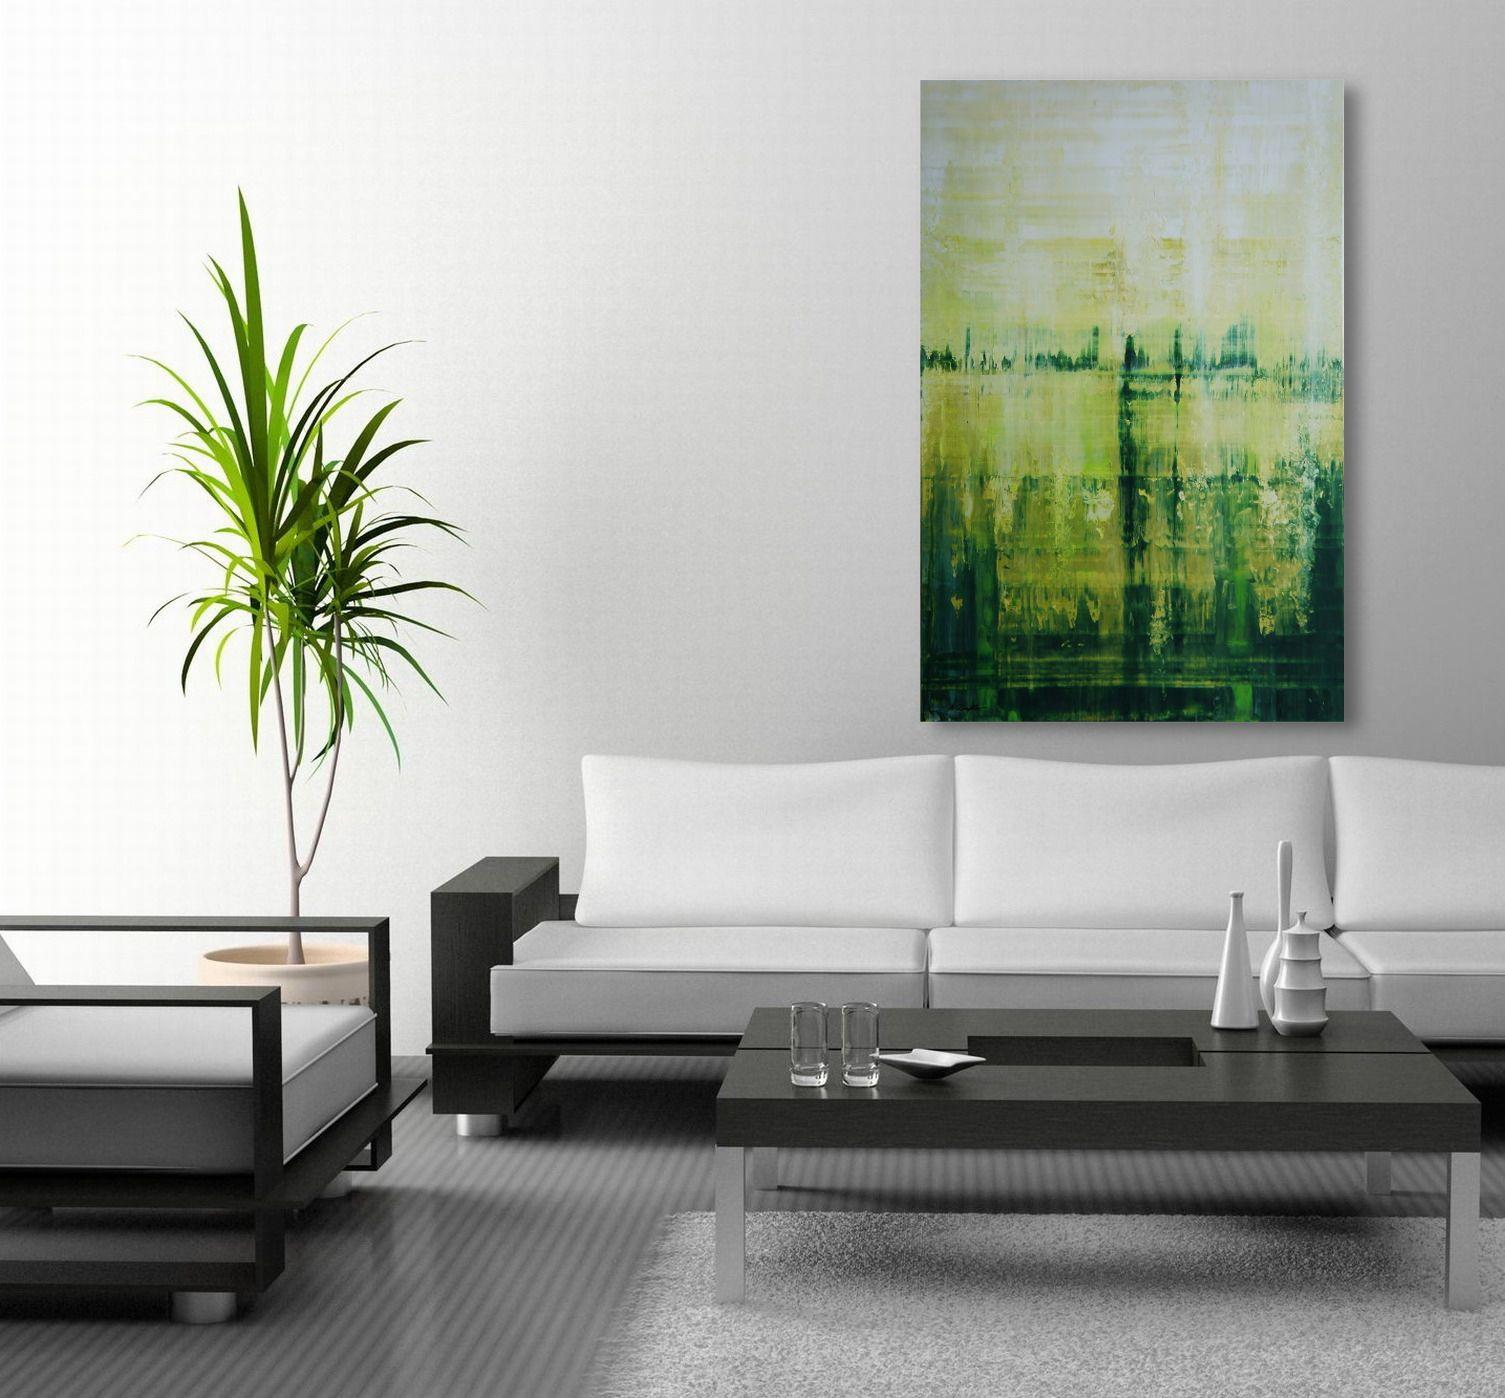 If you know the drink Mojito, you will know the colors of this painting without seeing it. Have a sip and enjoy!    Unique painting using high-quality acrylic colors on gesso-primed professional gallery canvas stretched over solid wooden 4.5 x 3.0